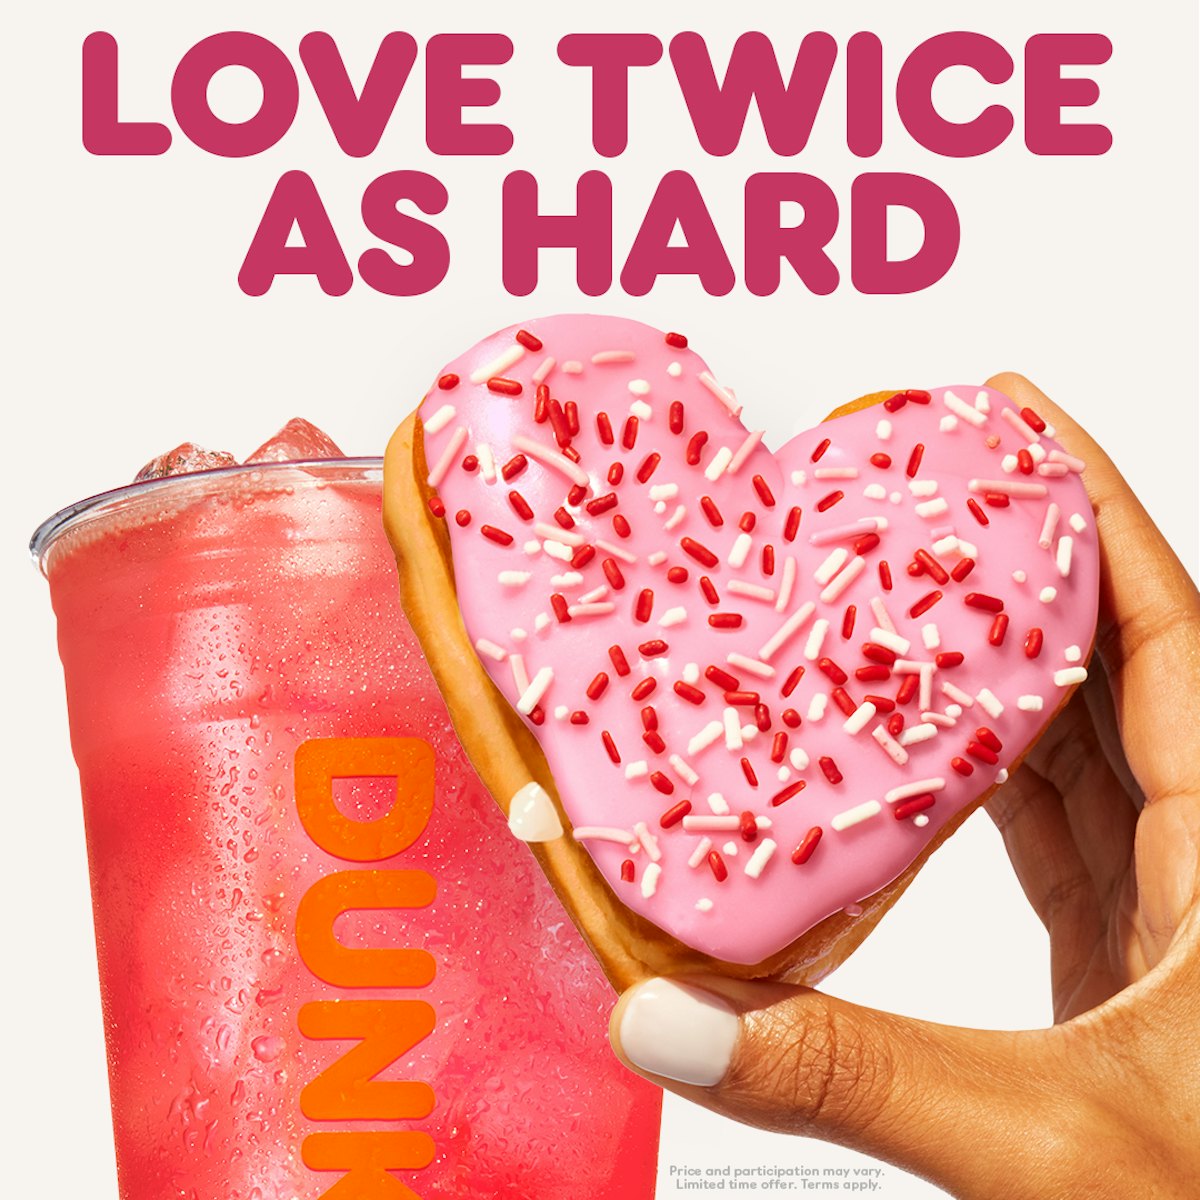 Dunkin's Valentine's Day menu is available on Feb. 1, 2023